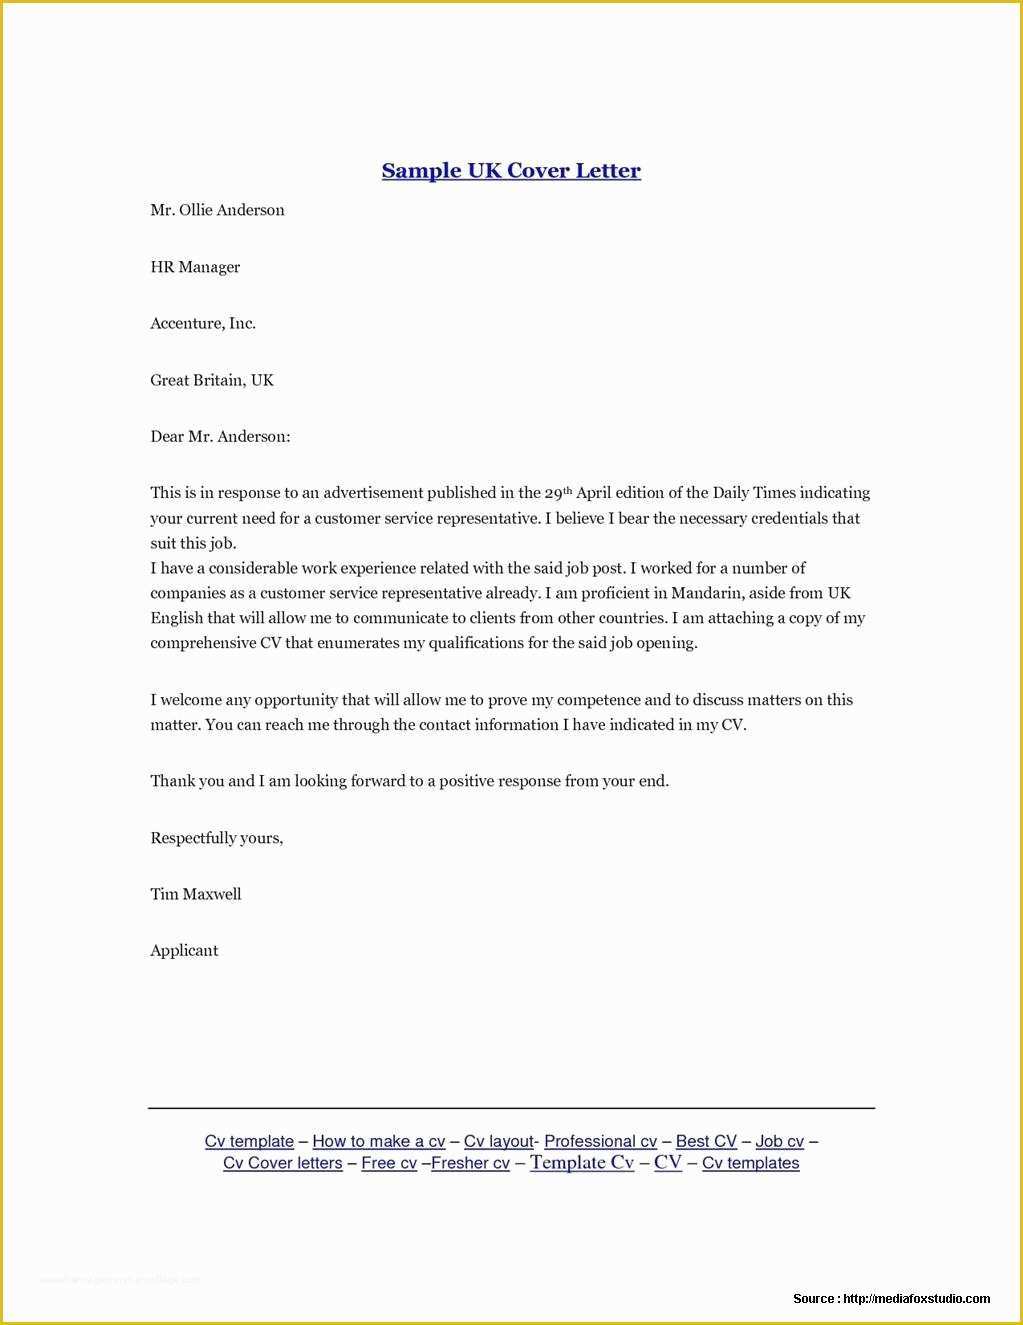 Free Resume and Cover Letter Templates Of Cover Letter Templates Free Uk Cover Letter Resume